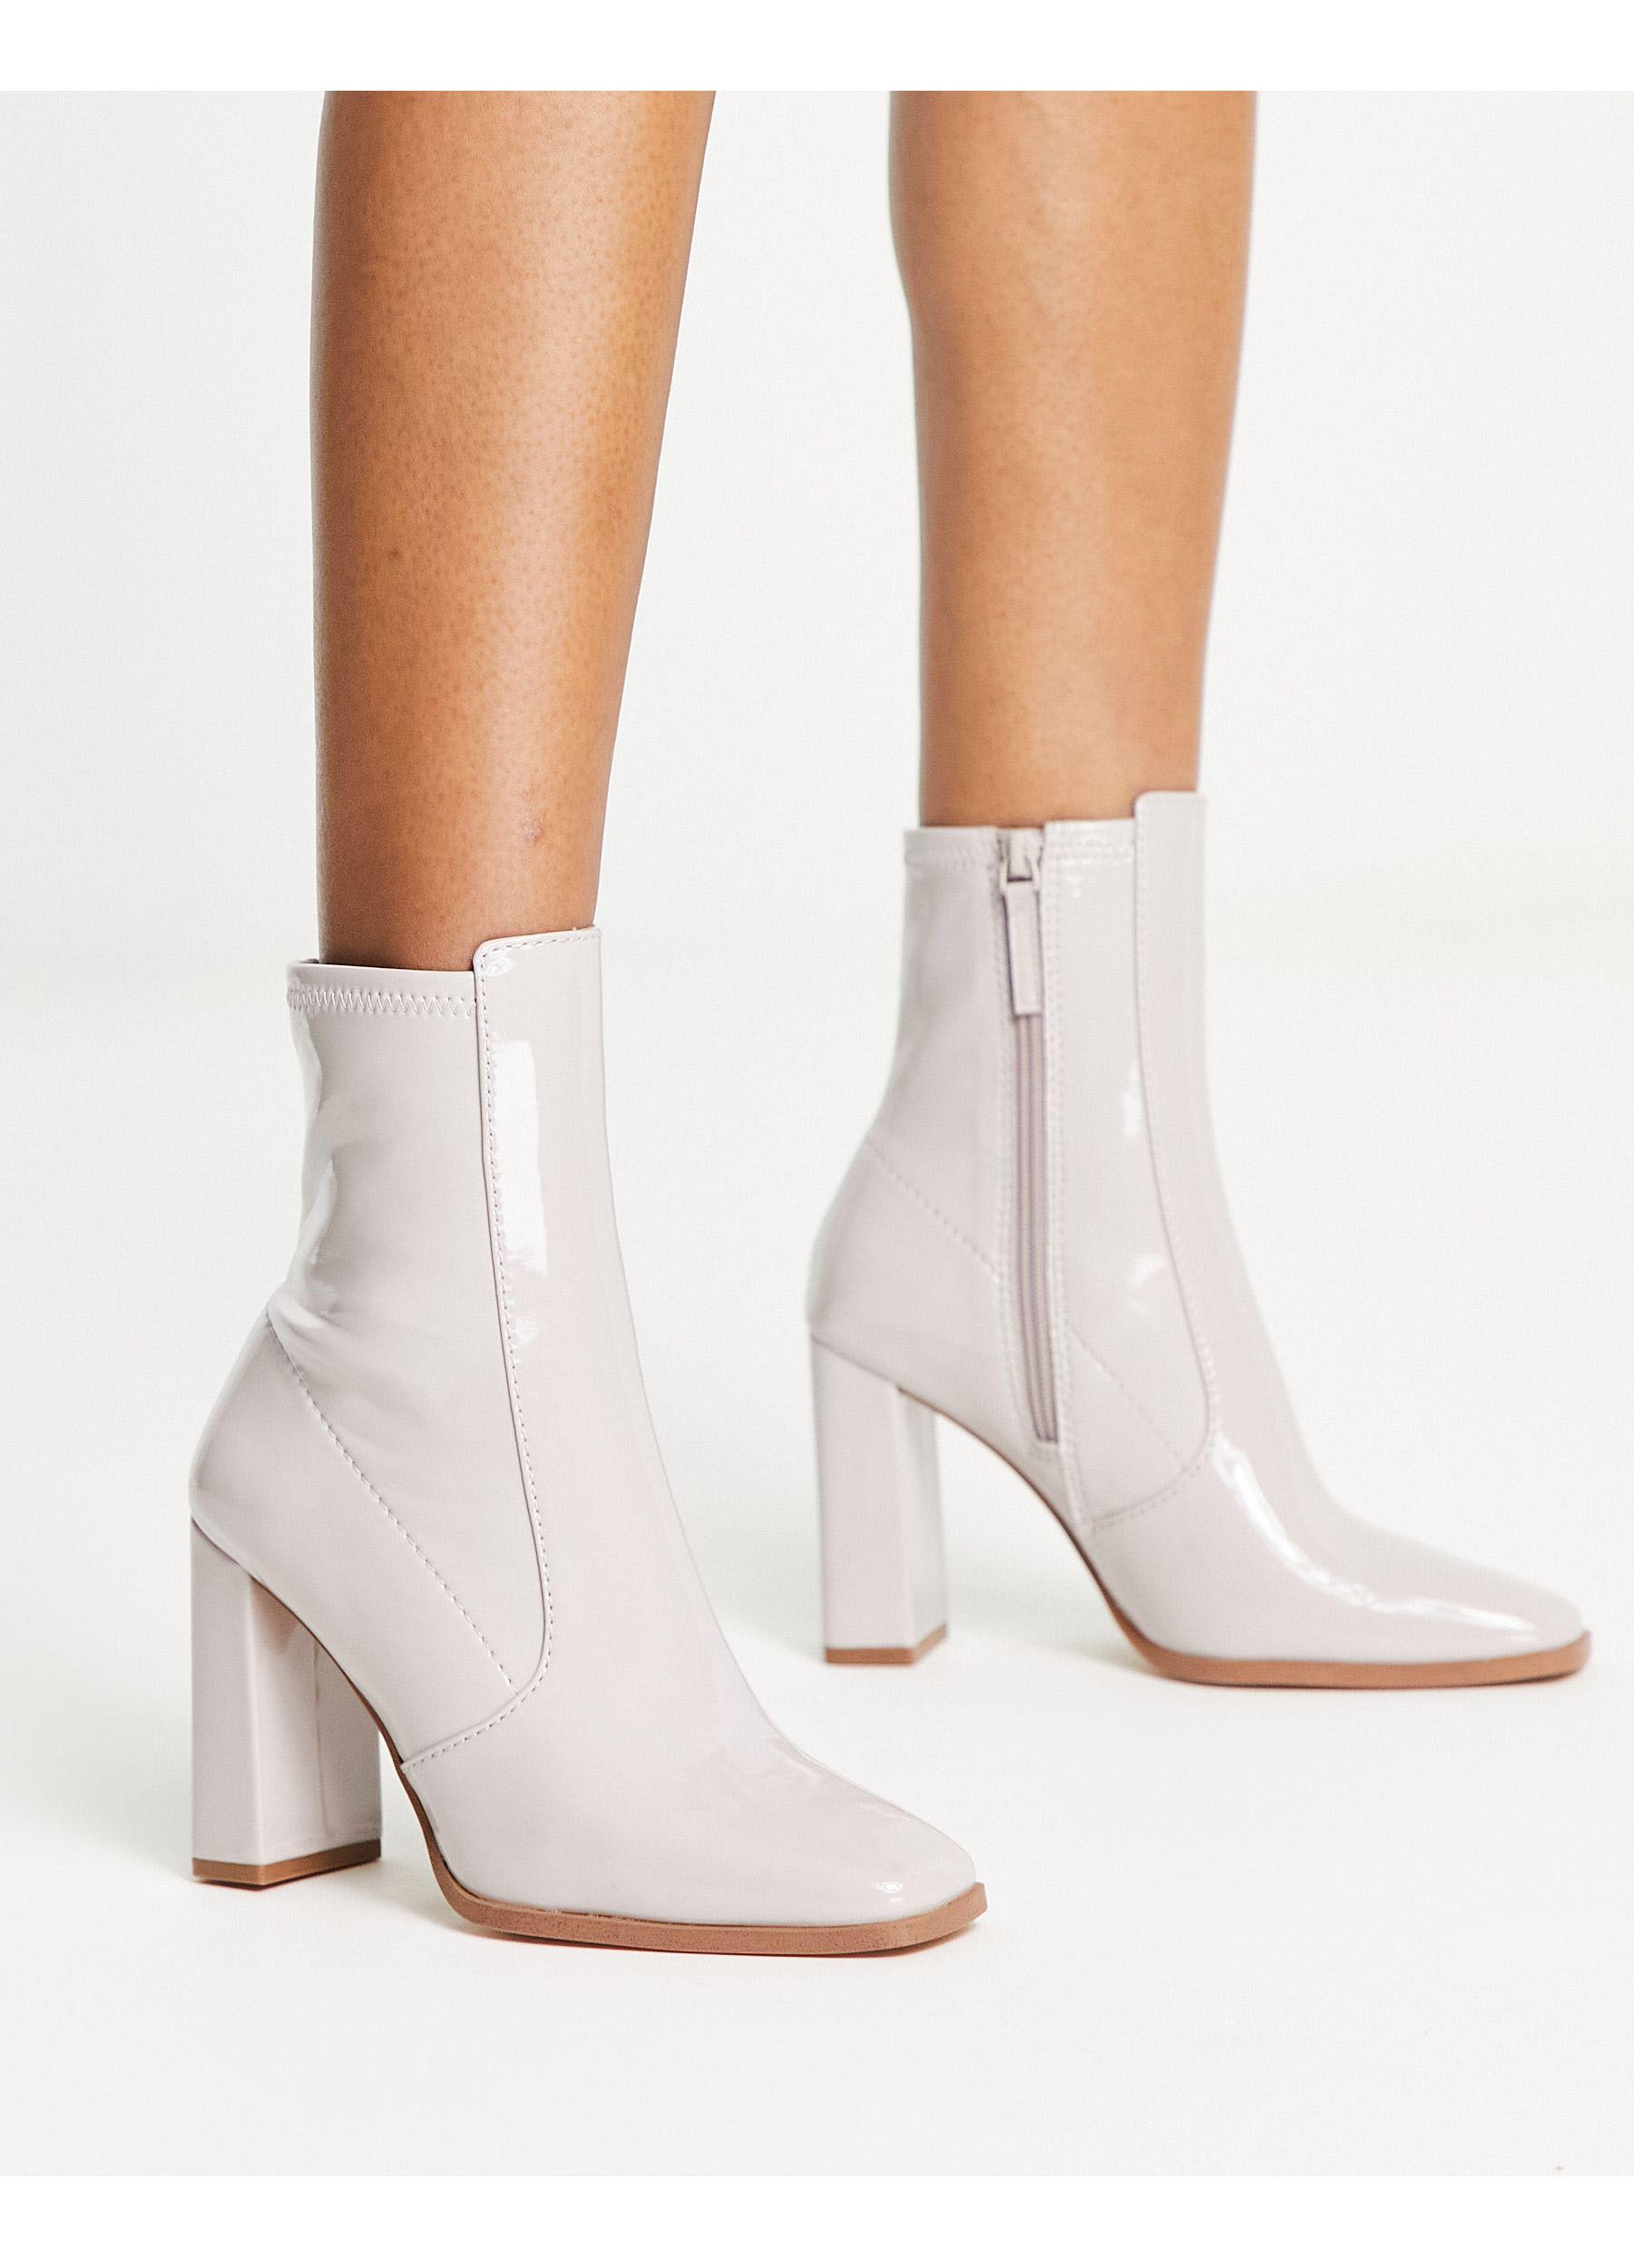 ALDO Audrella High Ankle Boots in White | Lyst